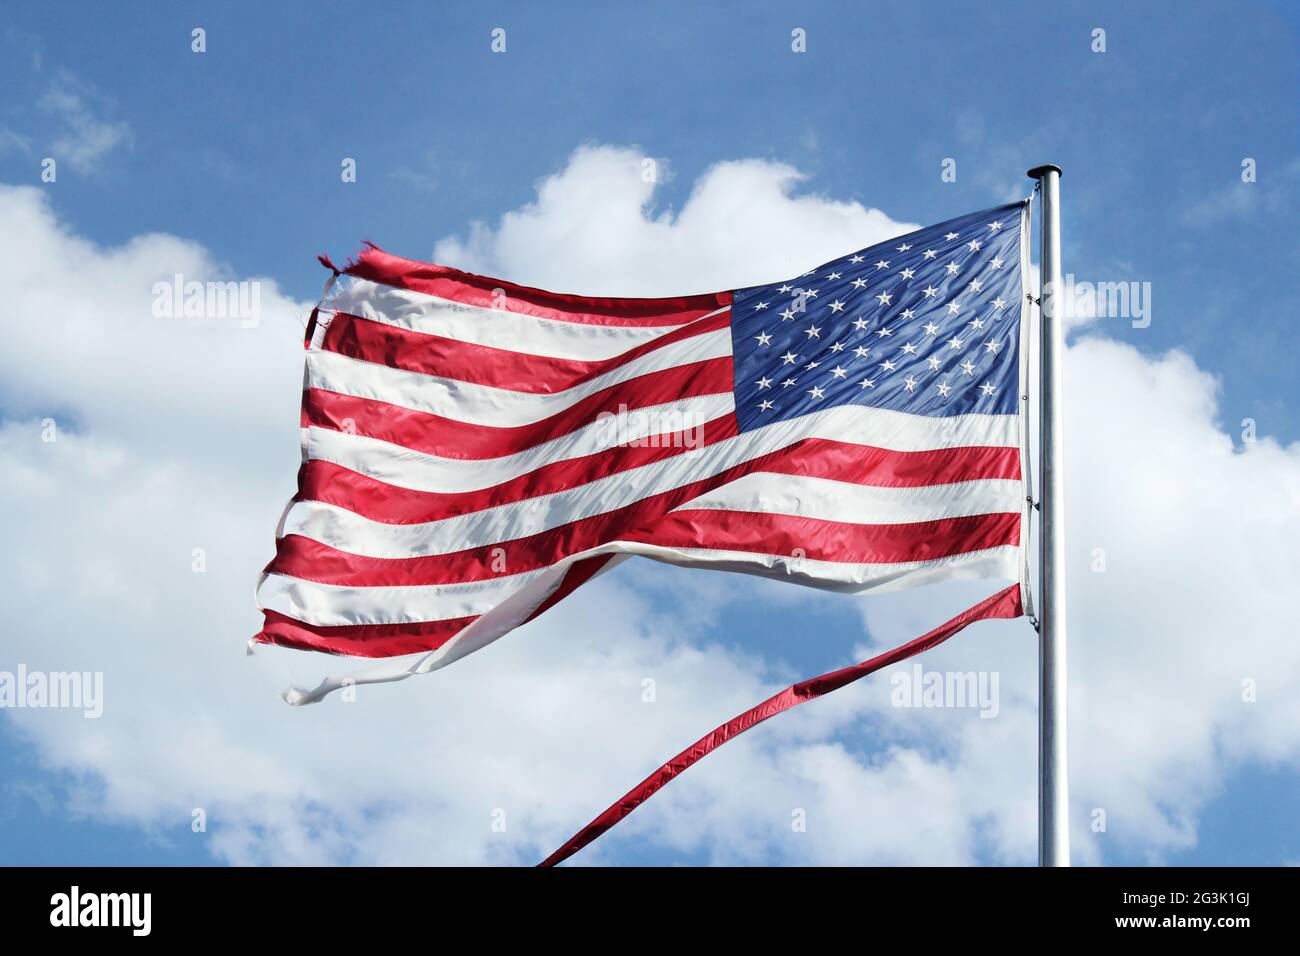 American flag flying against a blue sky Stock Photo